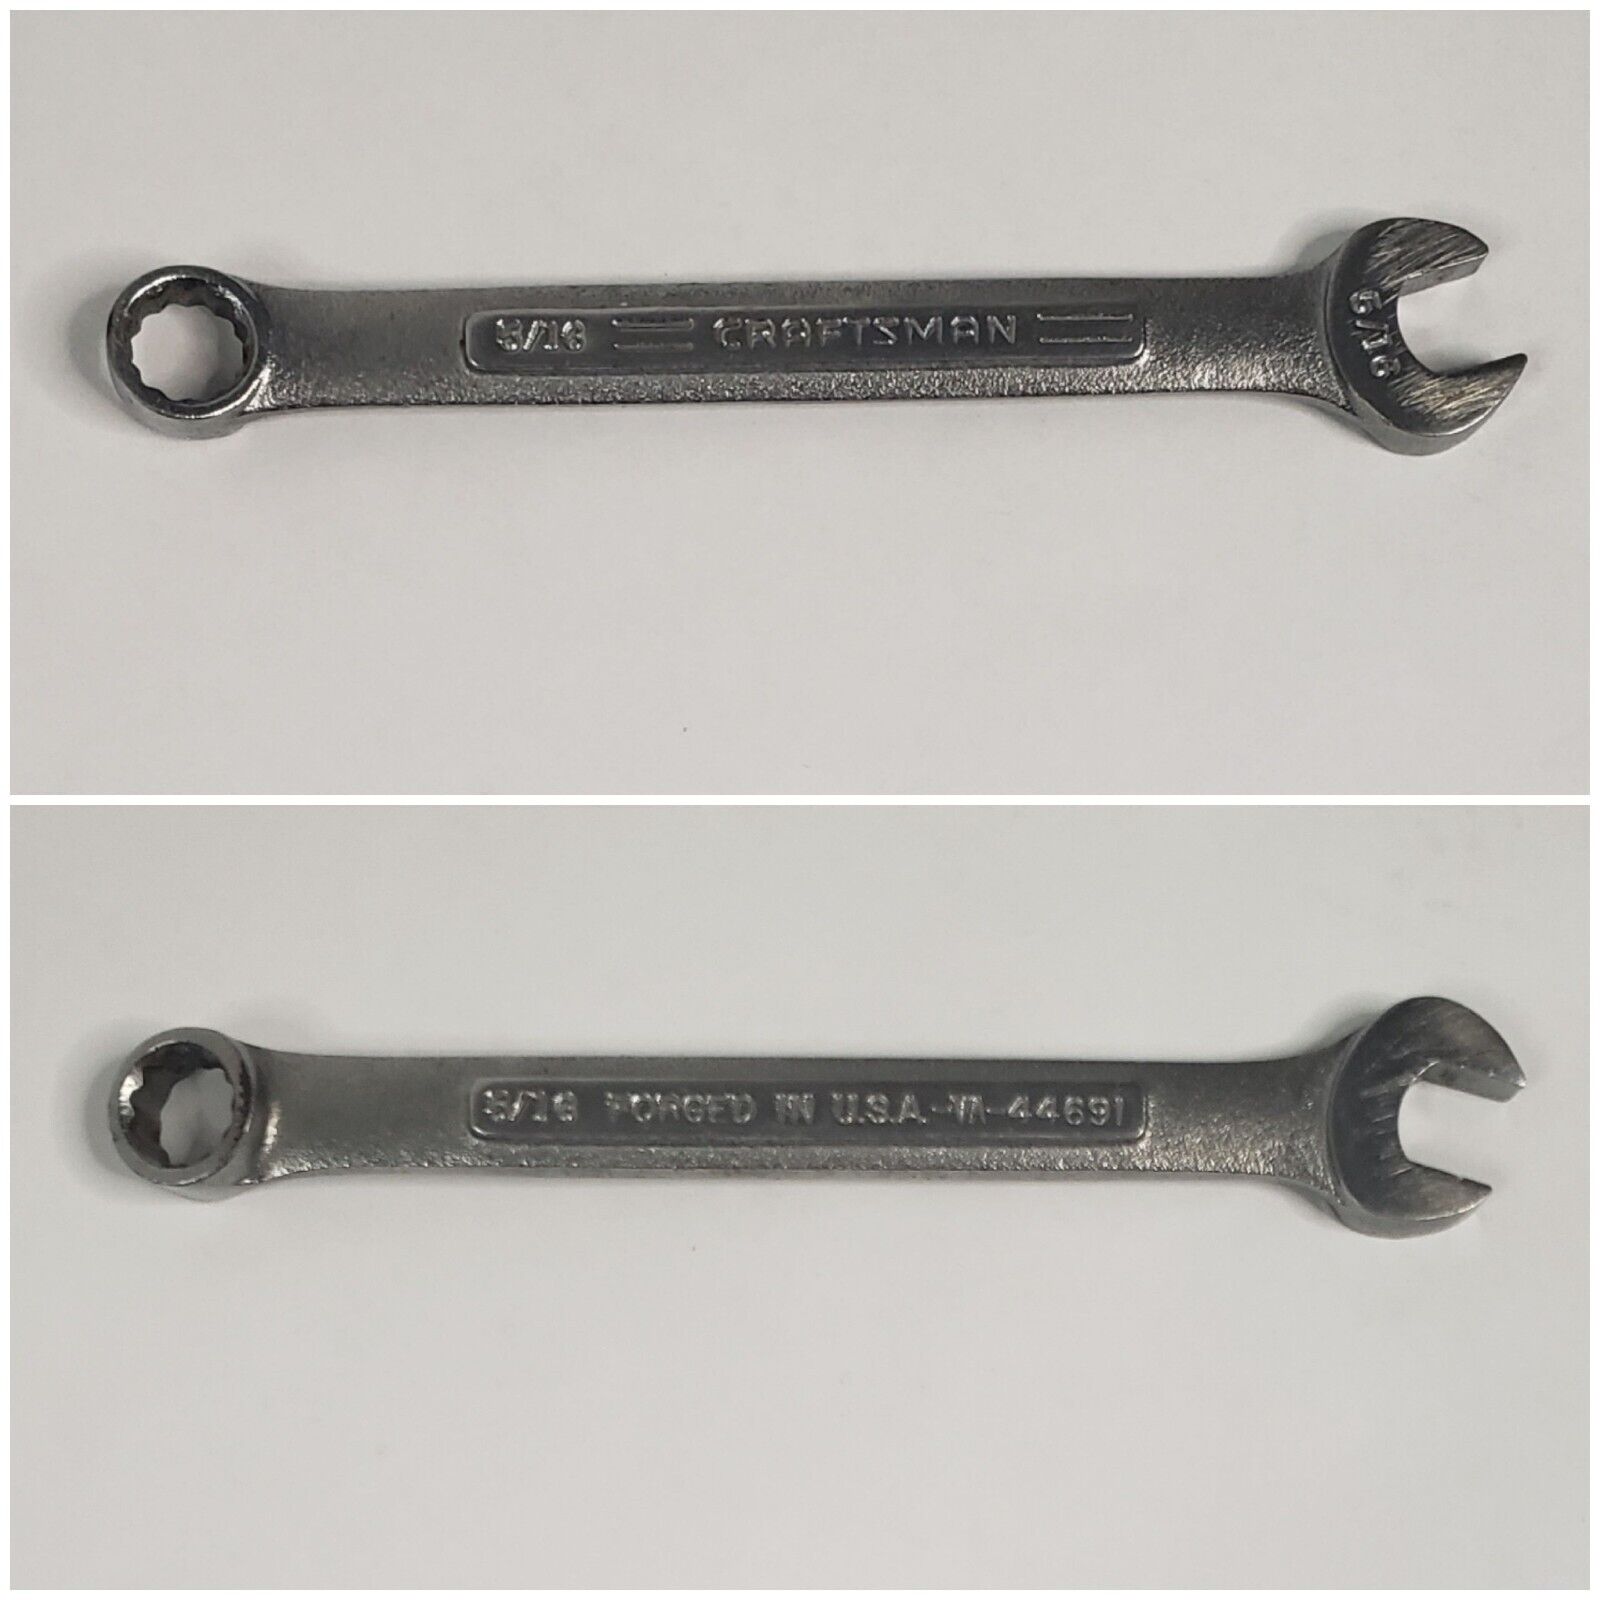 Vintage Craftsman 44691 Combination Wrench 5/16 Inch 12 Point USA